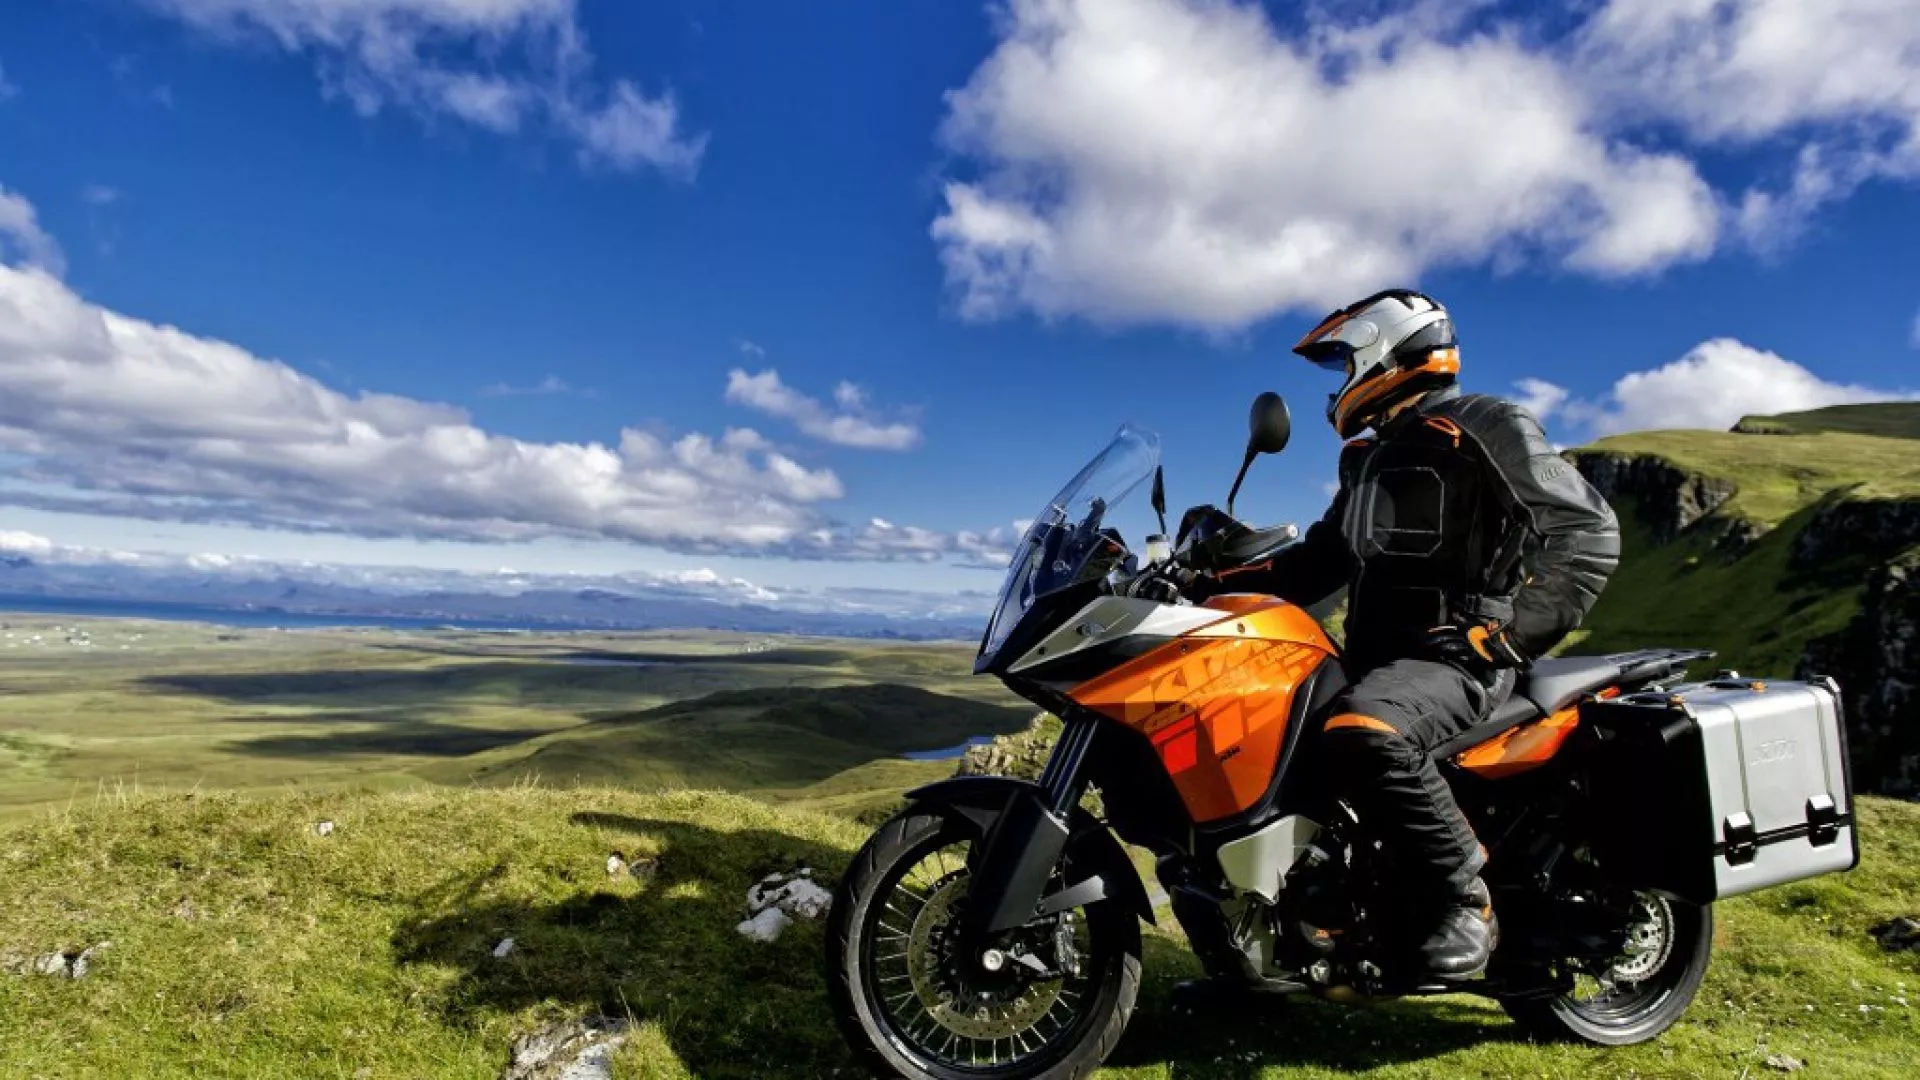 Idaho Motorcycle Tours in USA, North America | Motorcycles - Rated 0.9